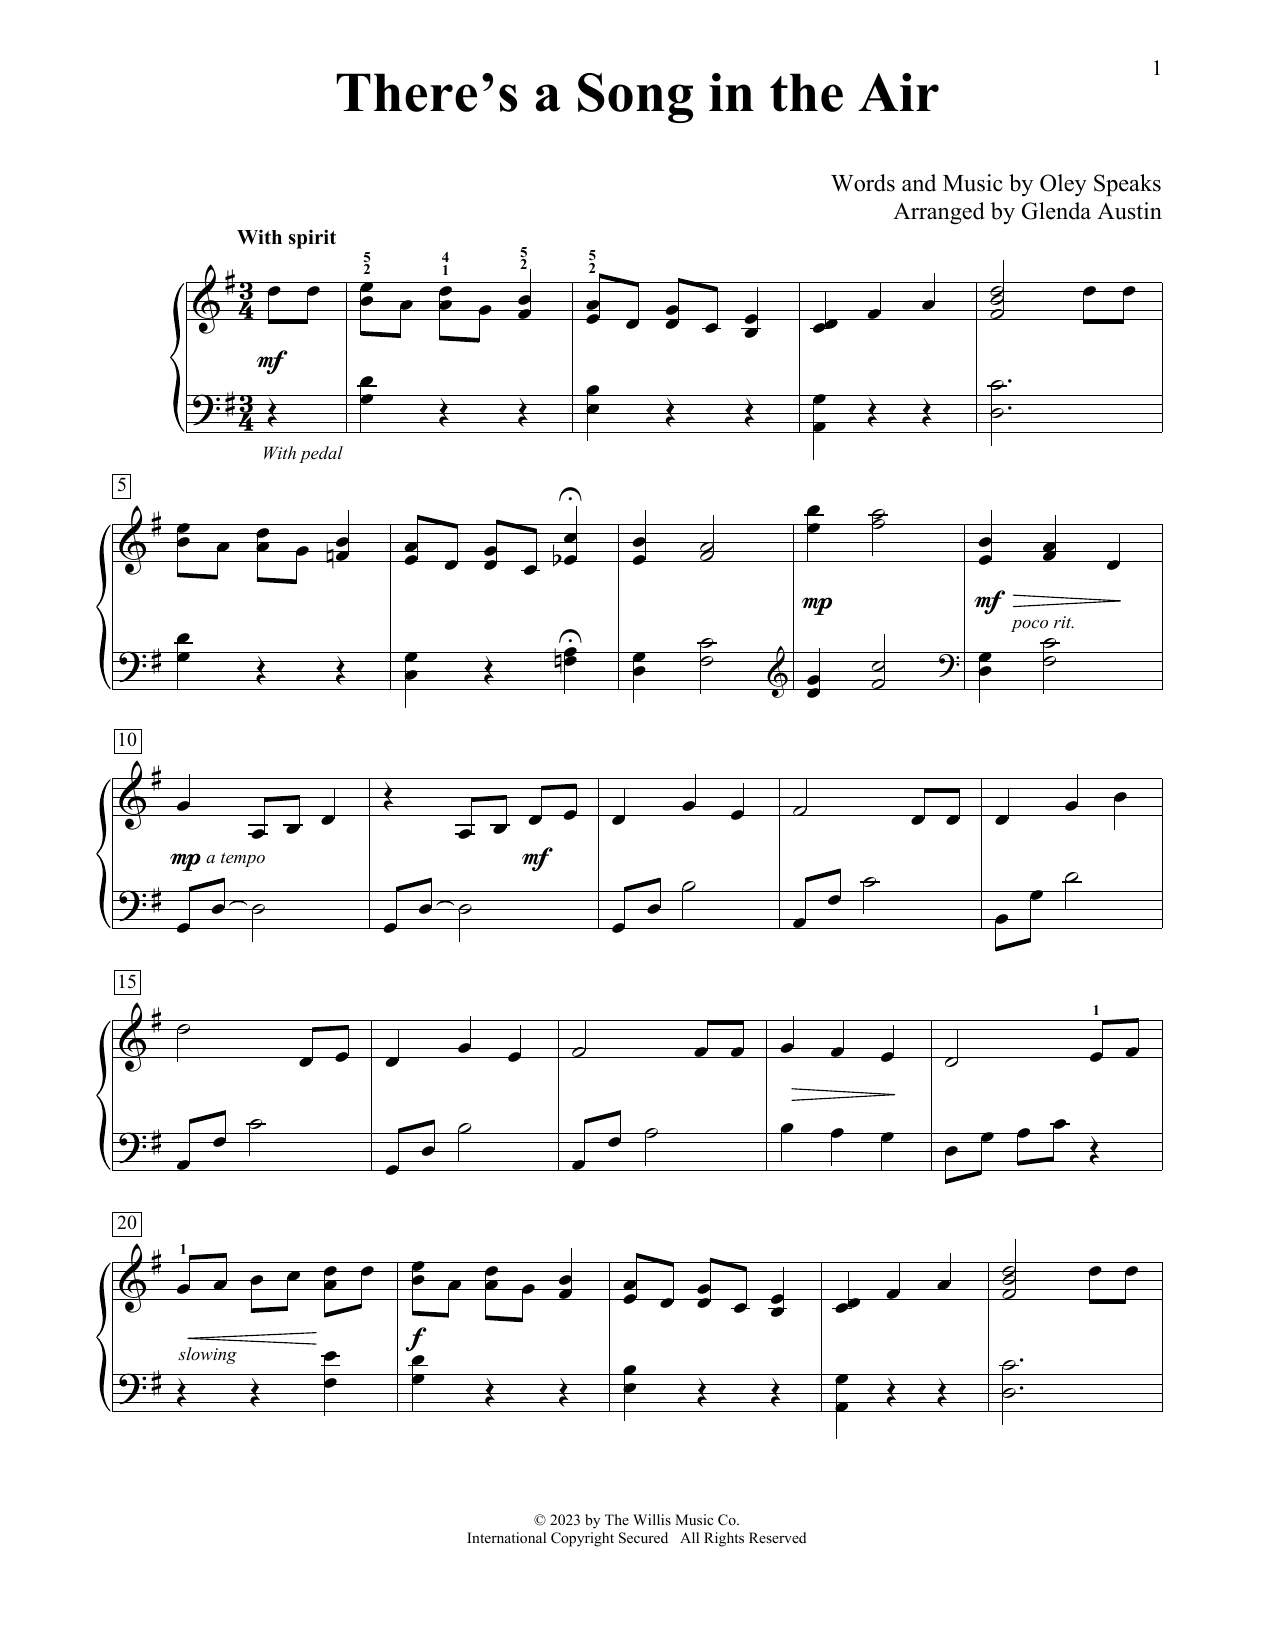 There's A Song In The Air (arr. Glenda Austin) (Educational Piano) von Oley Speaks